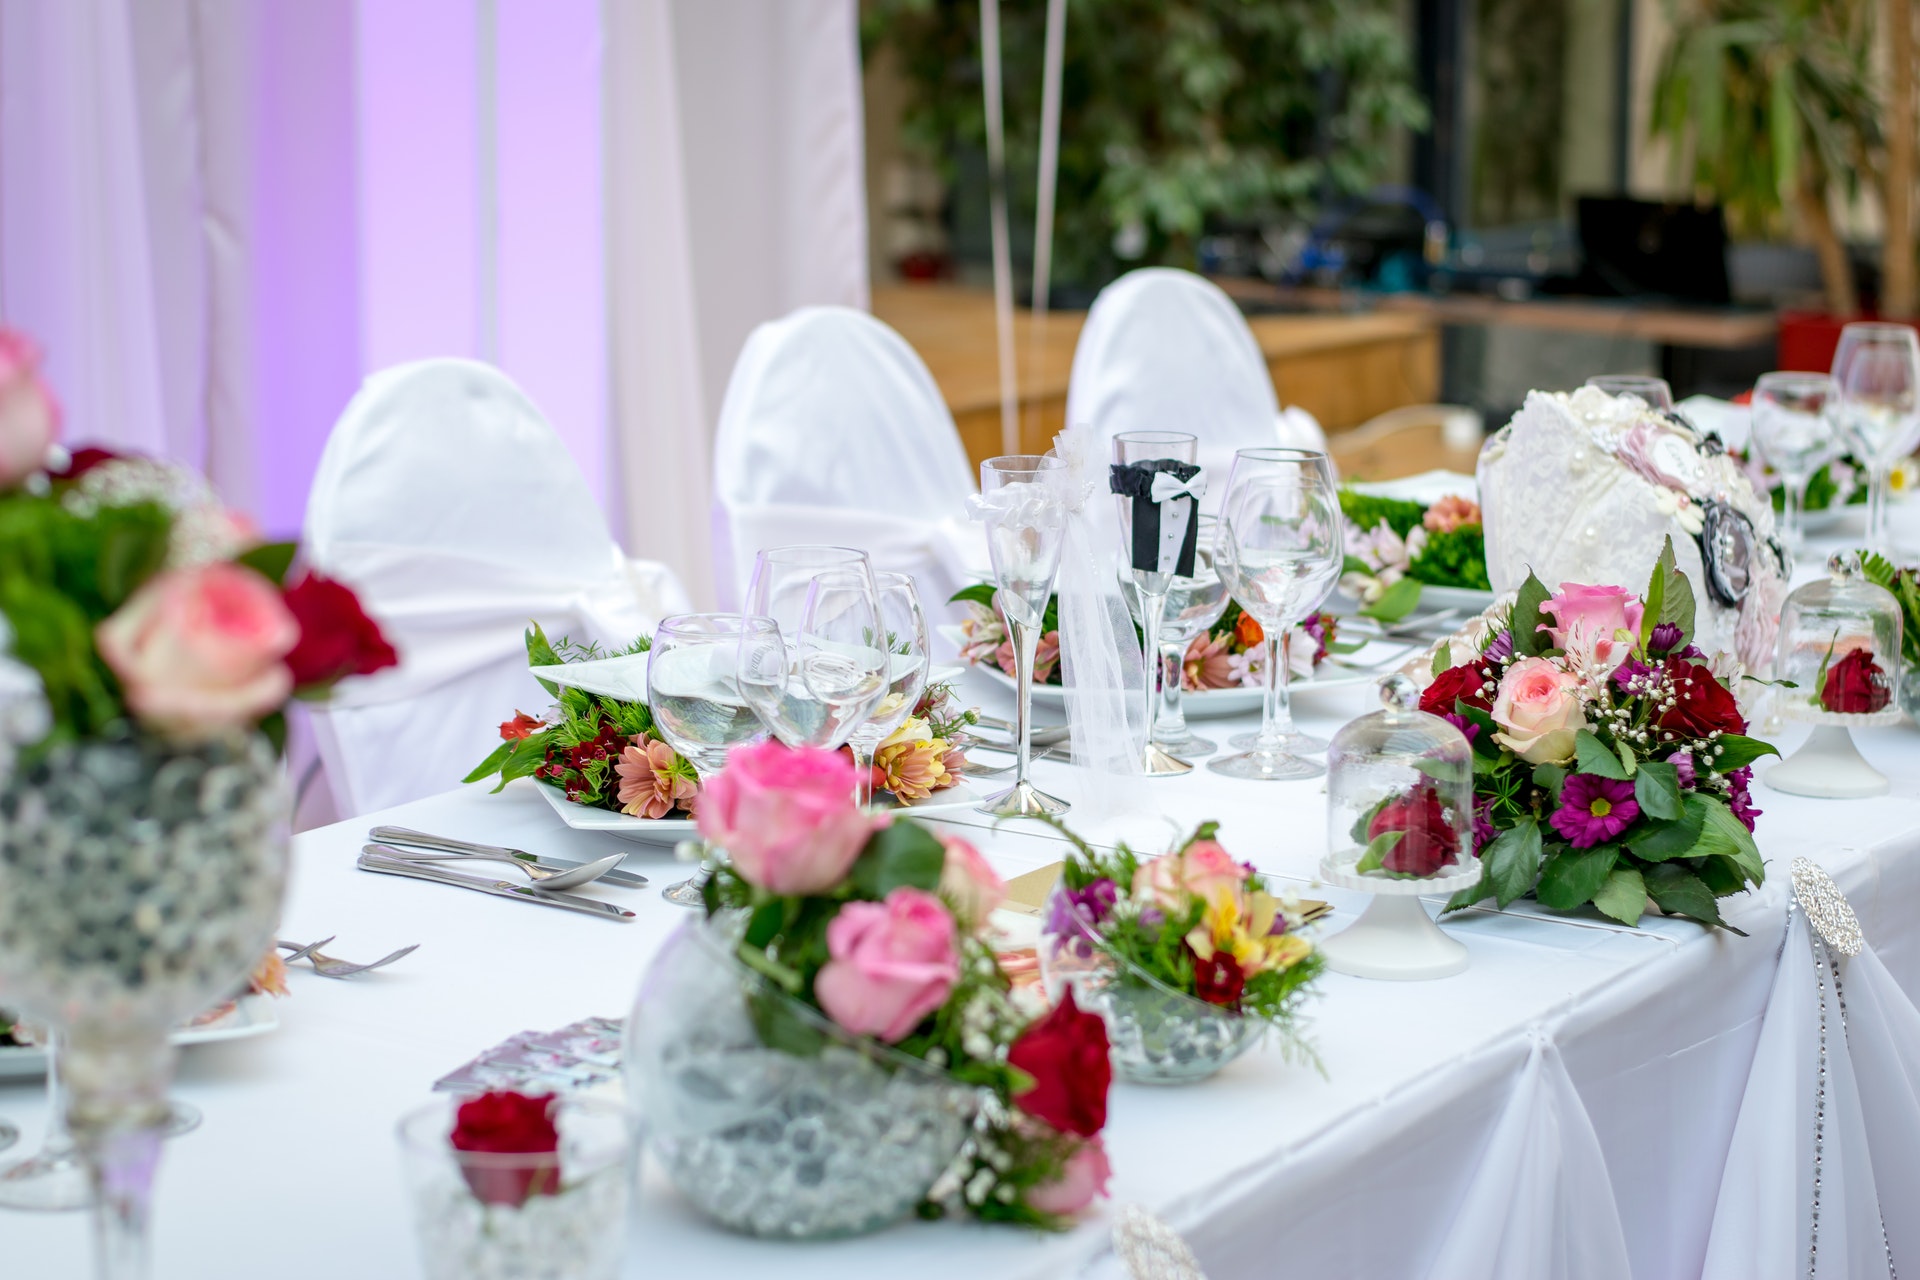 LED lighting for weddings can save money and energy.